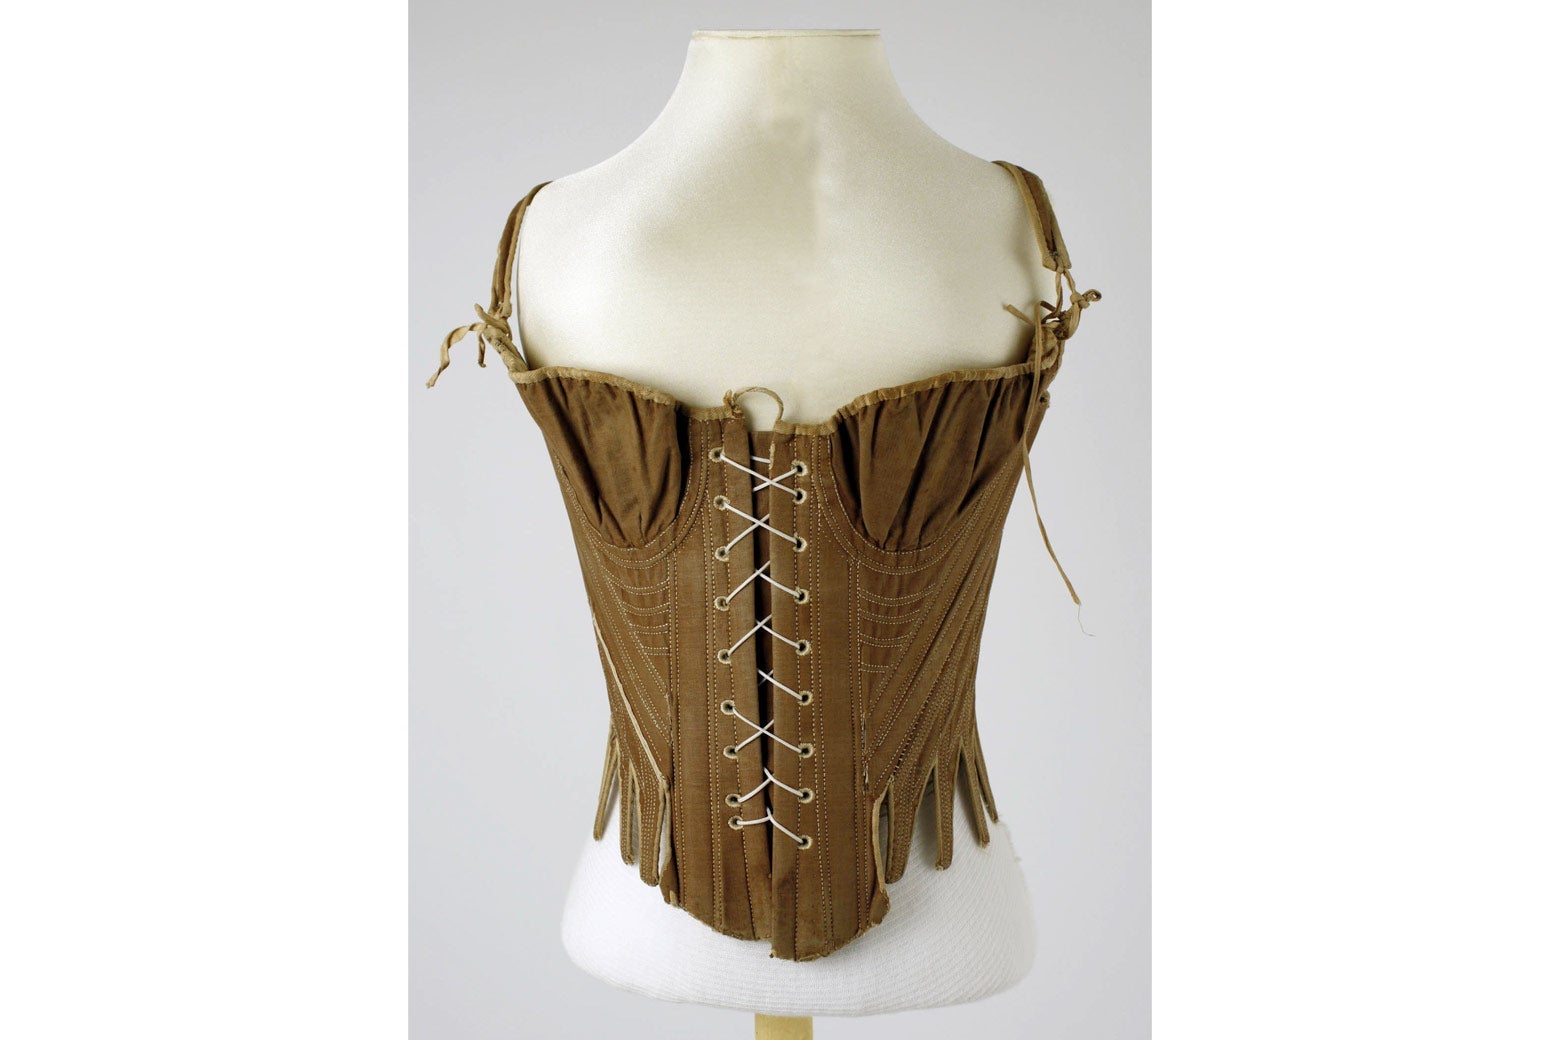 A dark brown corset on a torso model. It is laced up the frost and has loose pouches for the breasts.